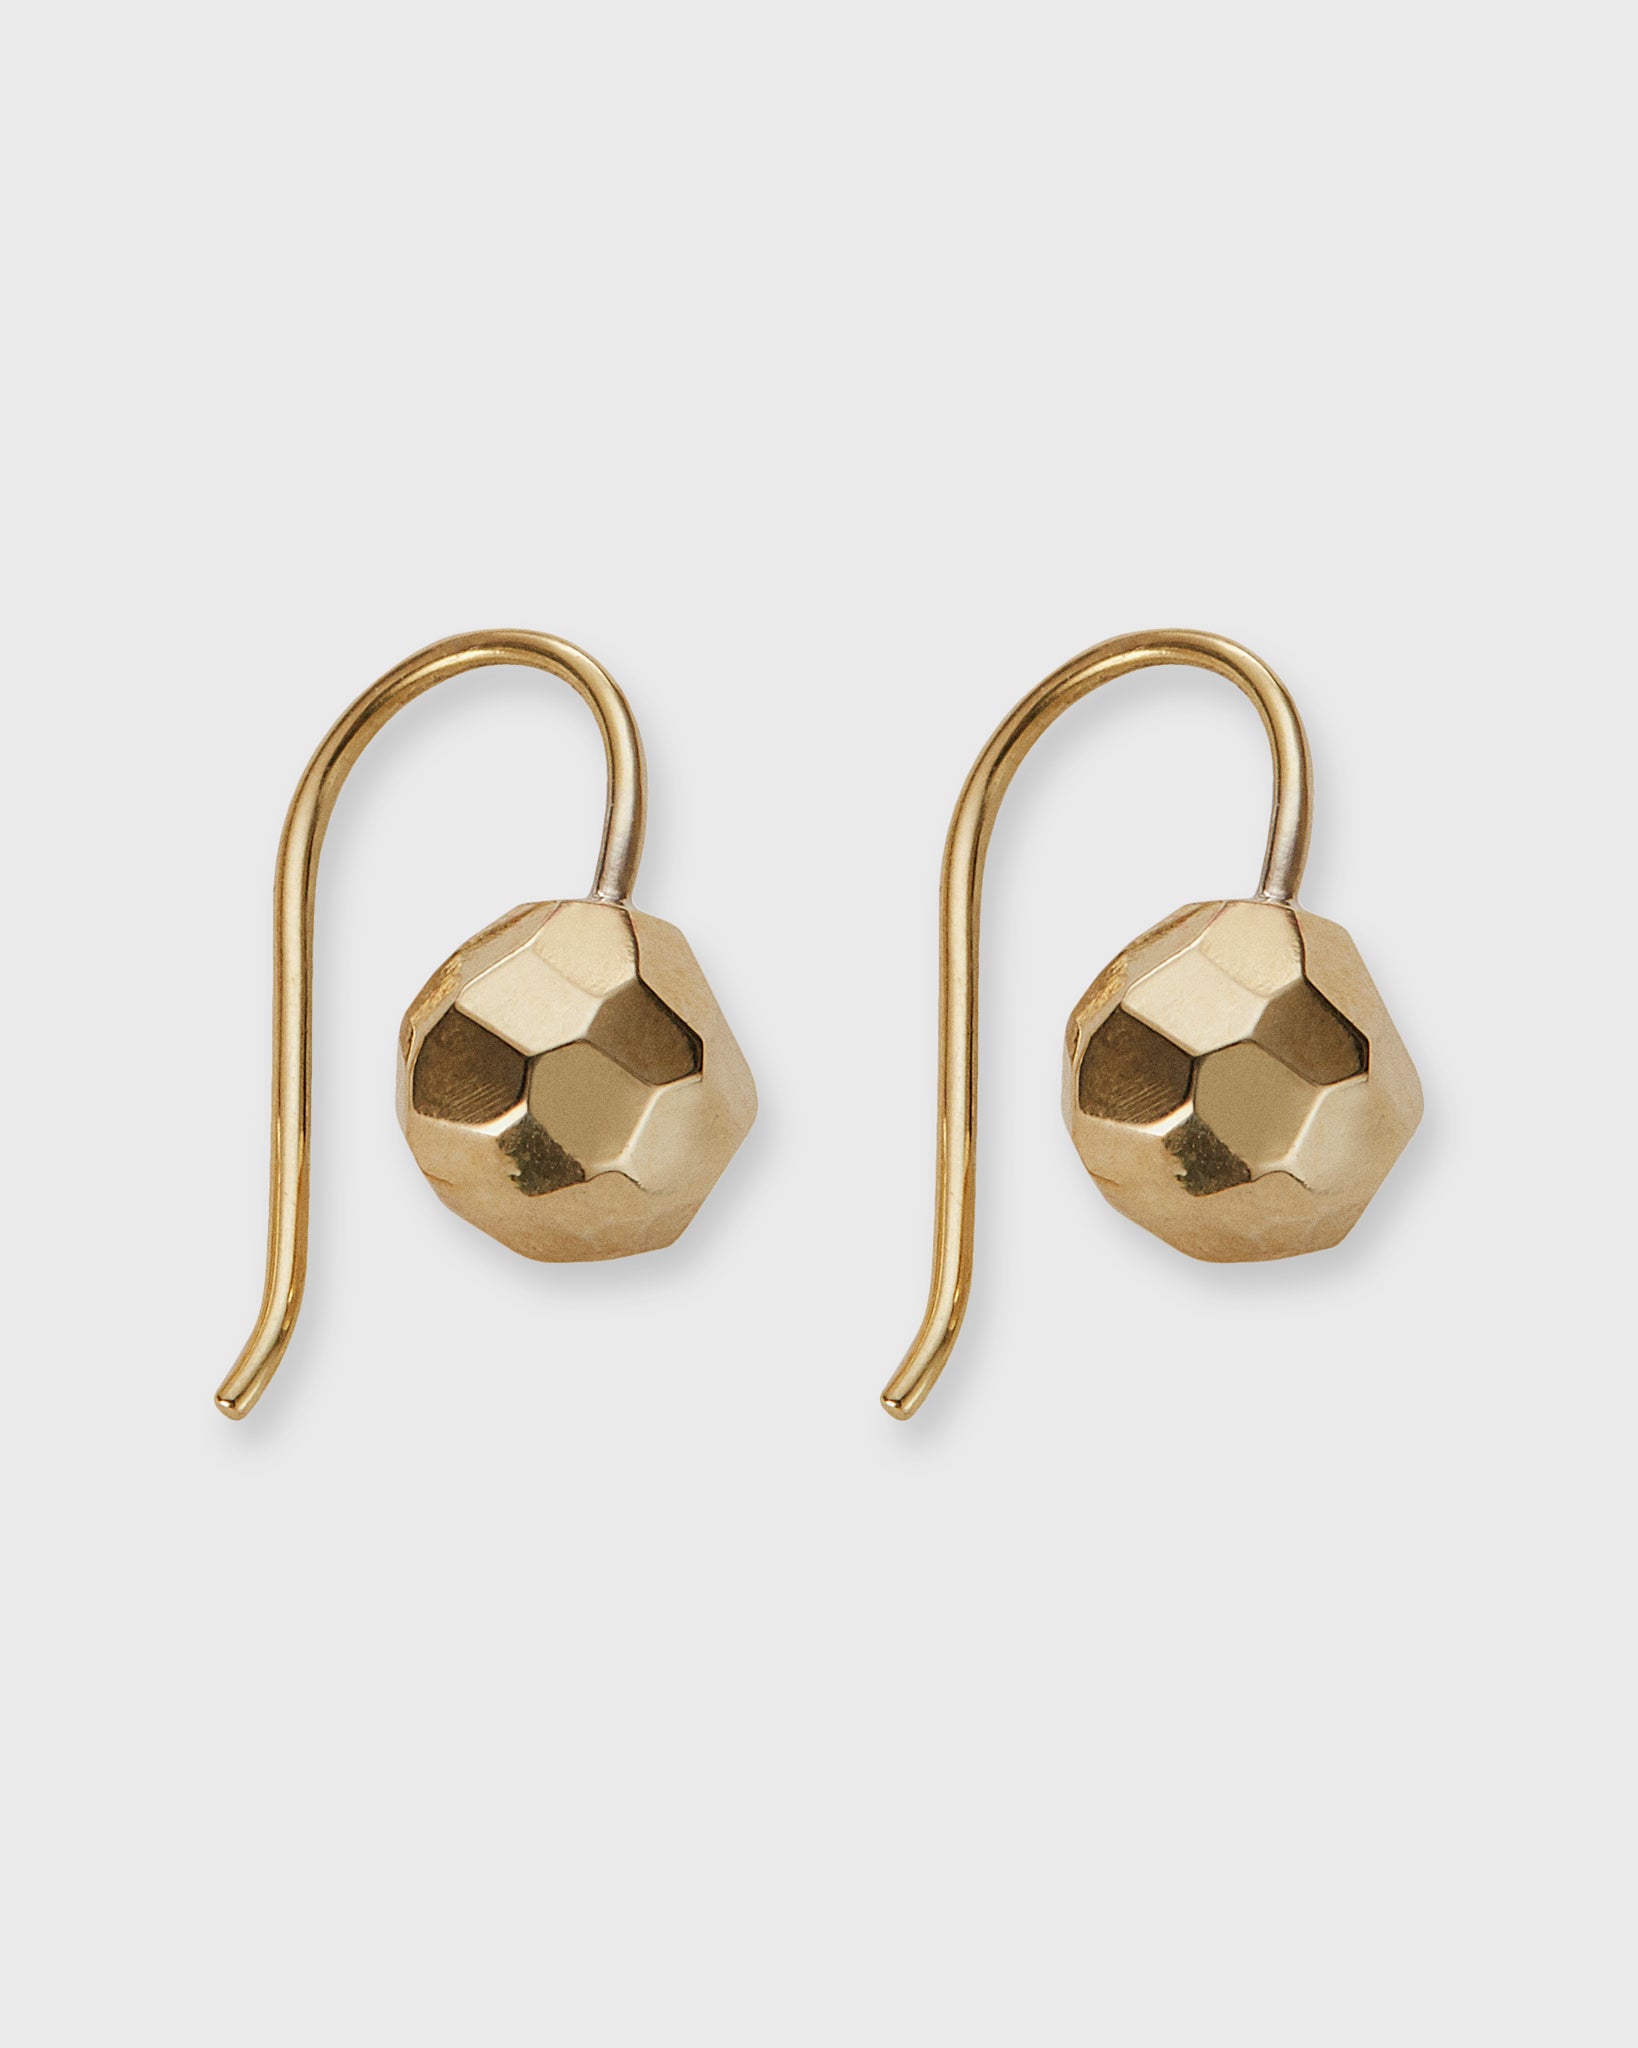 Round Bead Hook Earrings in Gold-Plated Brass